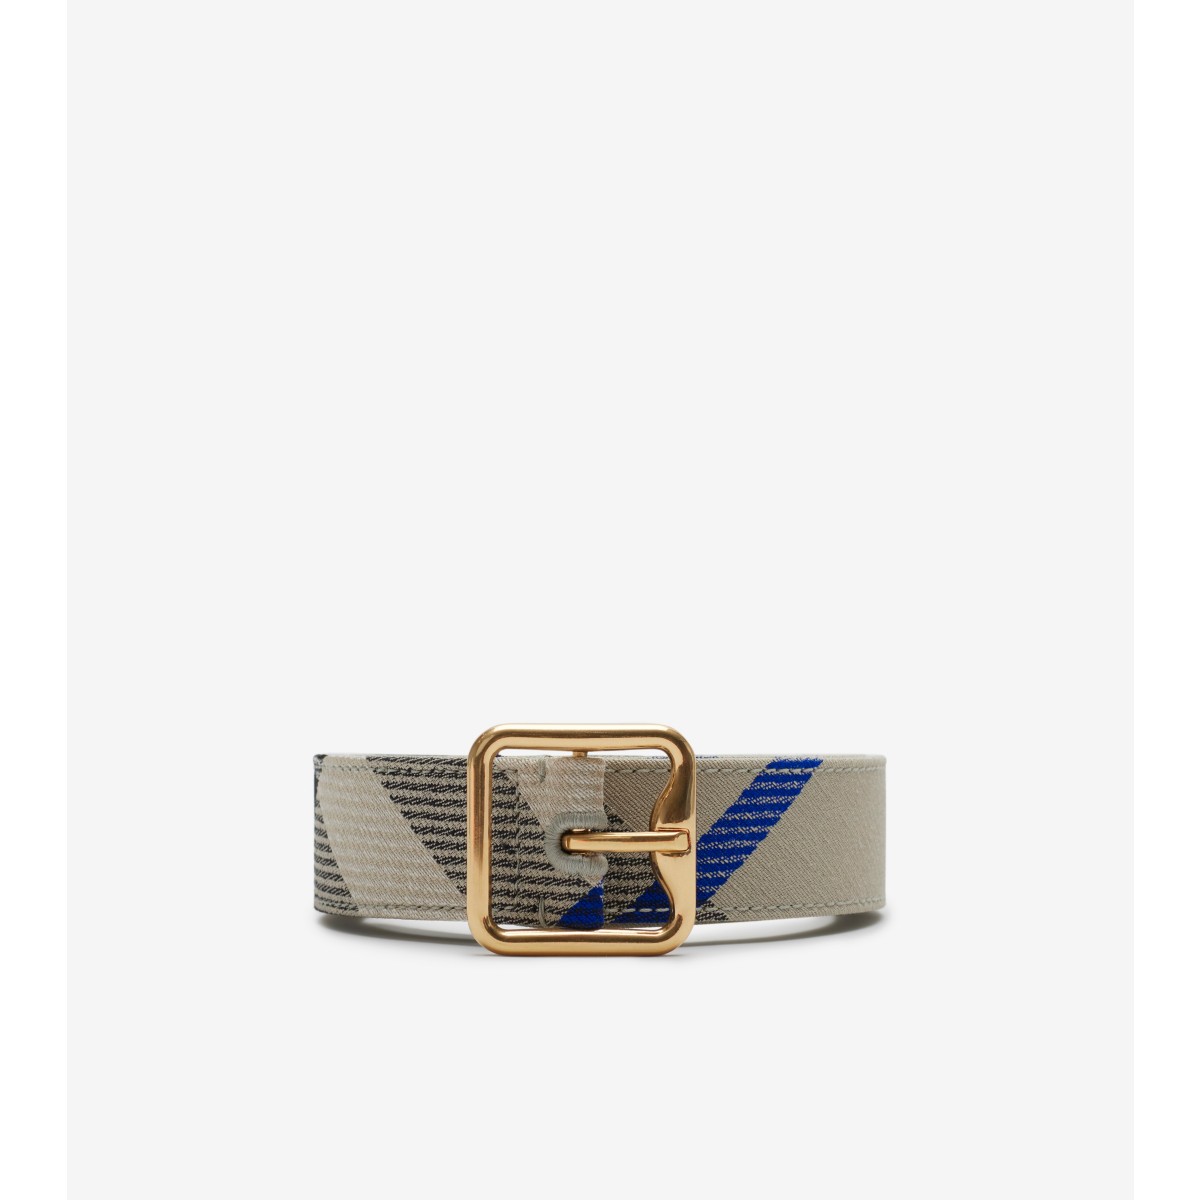 Burberry Check B Buckle Belt In Green